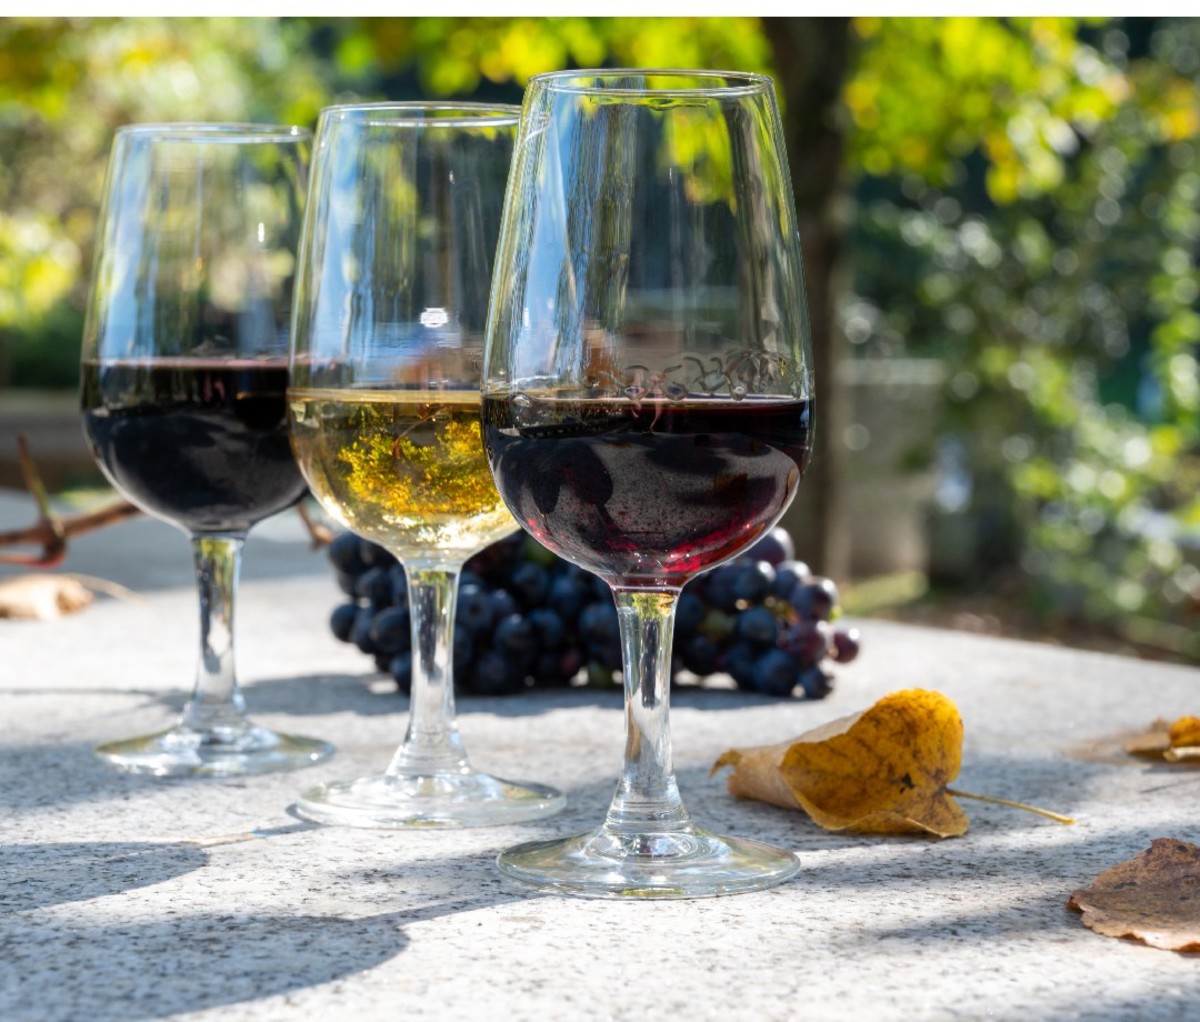 Outdoor table with selection of three different port wines in glasses.